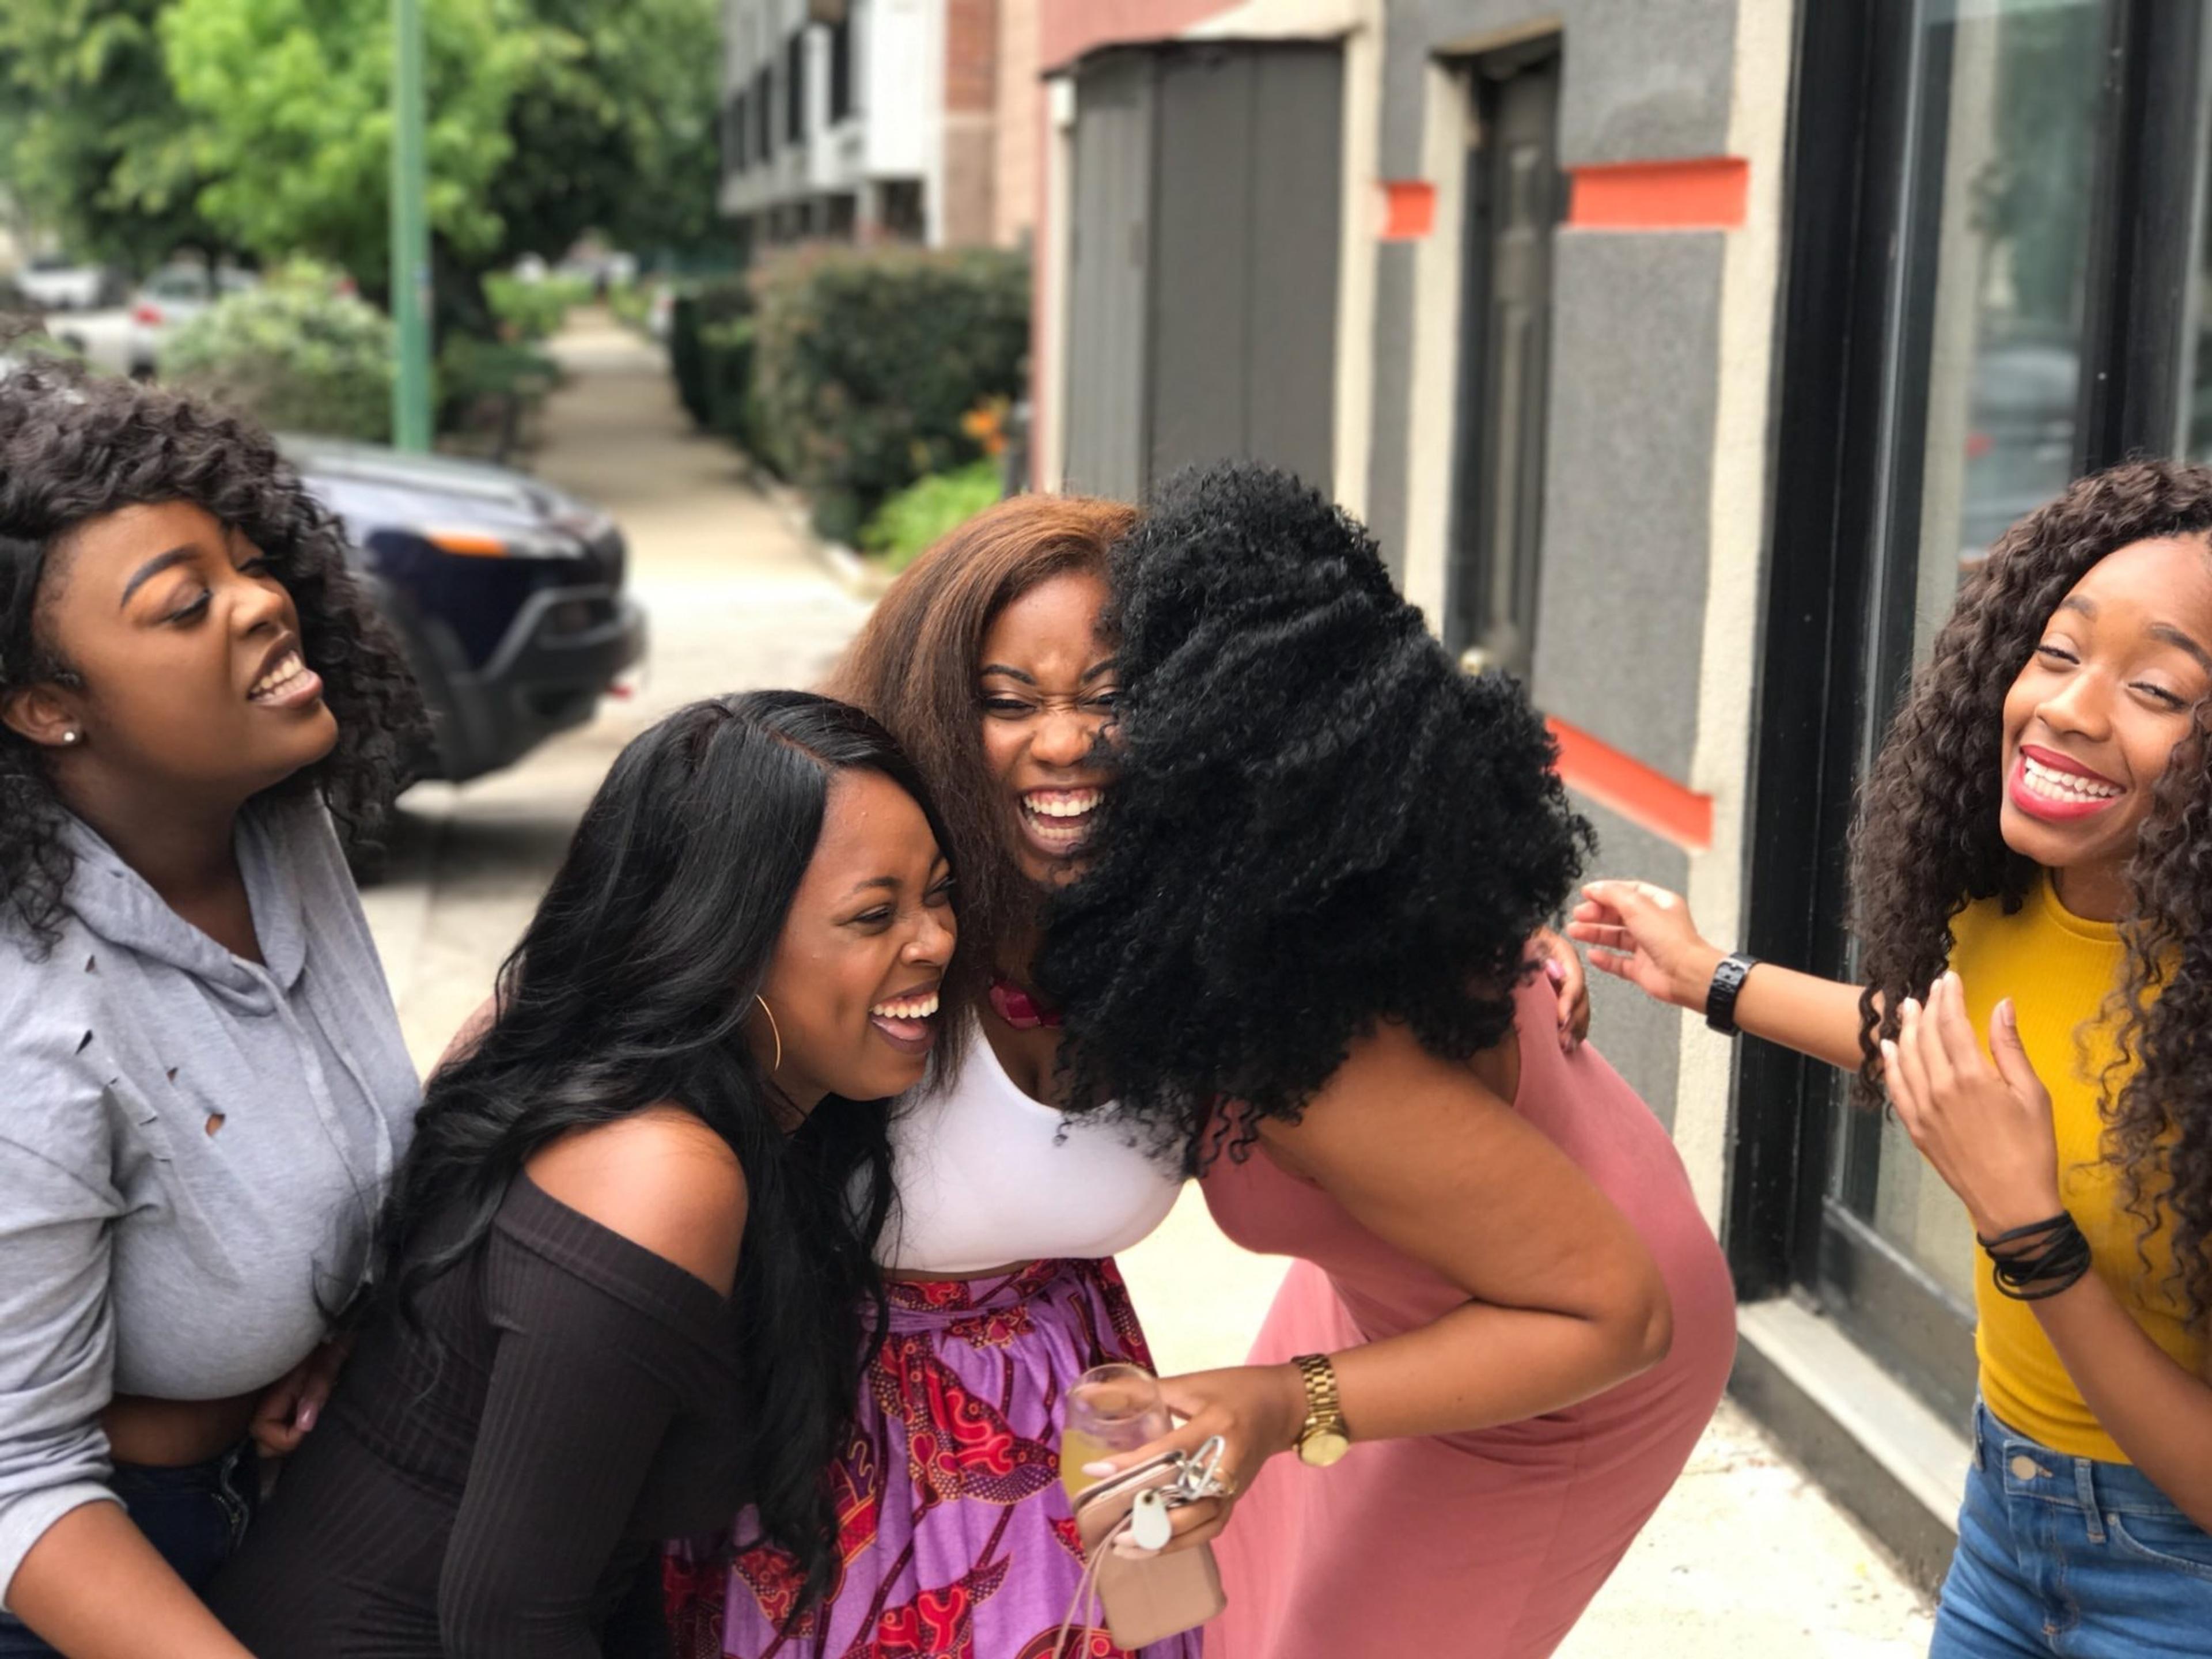 A group of Black women laughing and hugging on a sidewalk